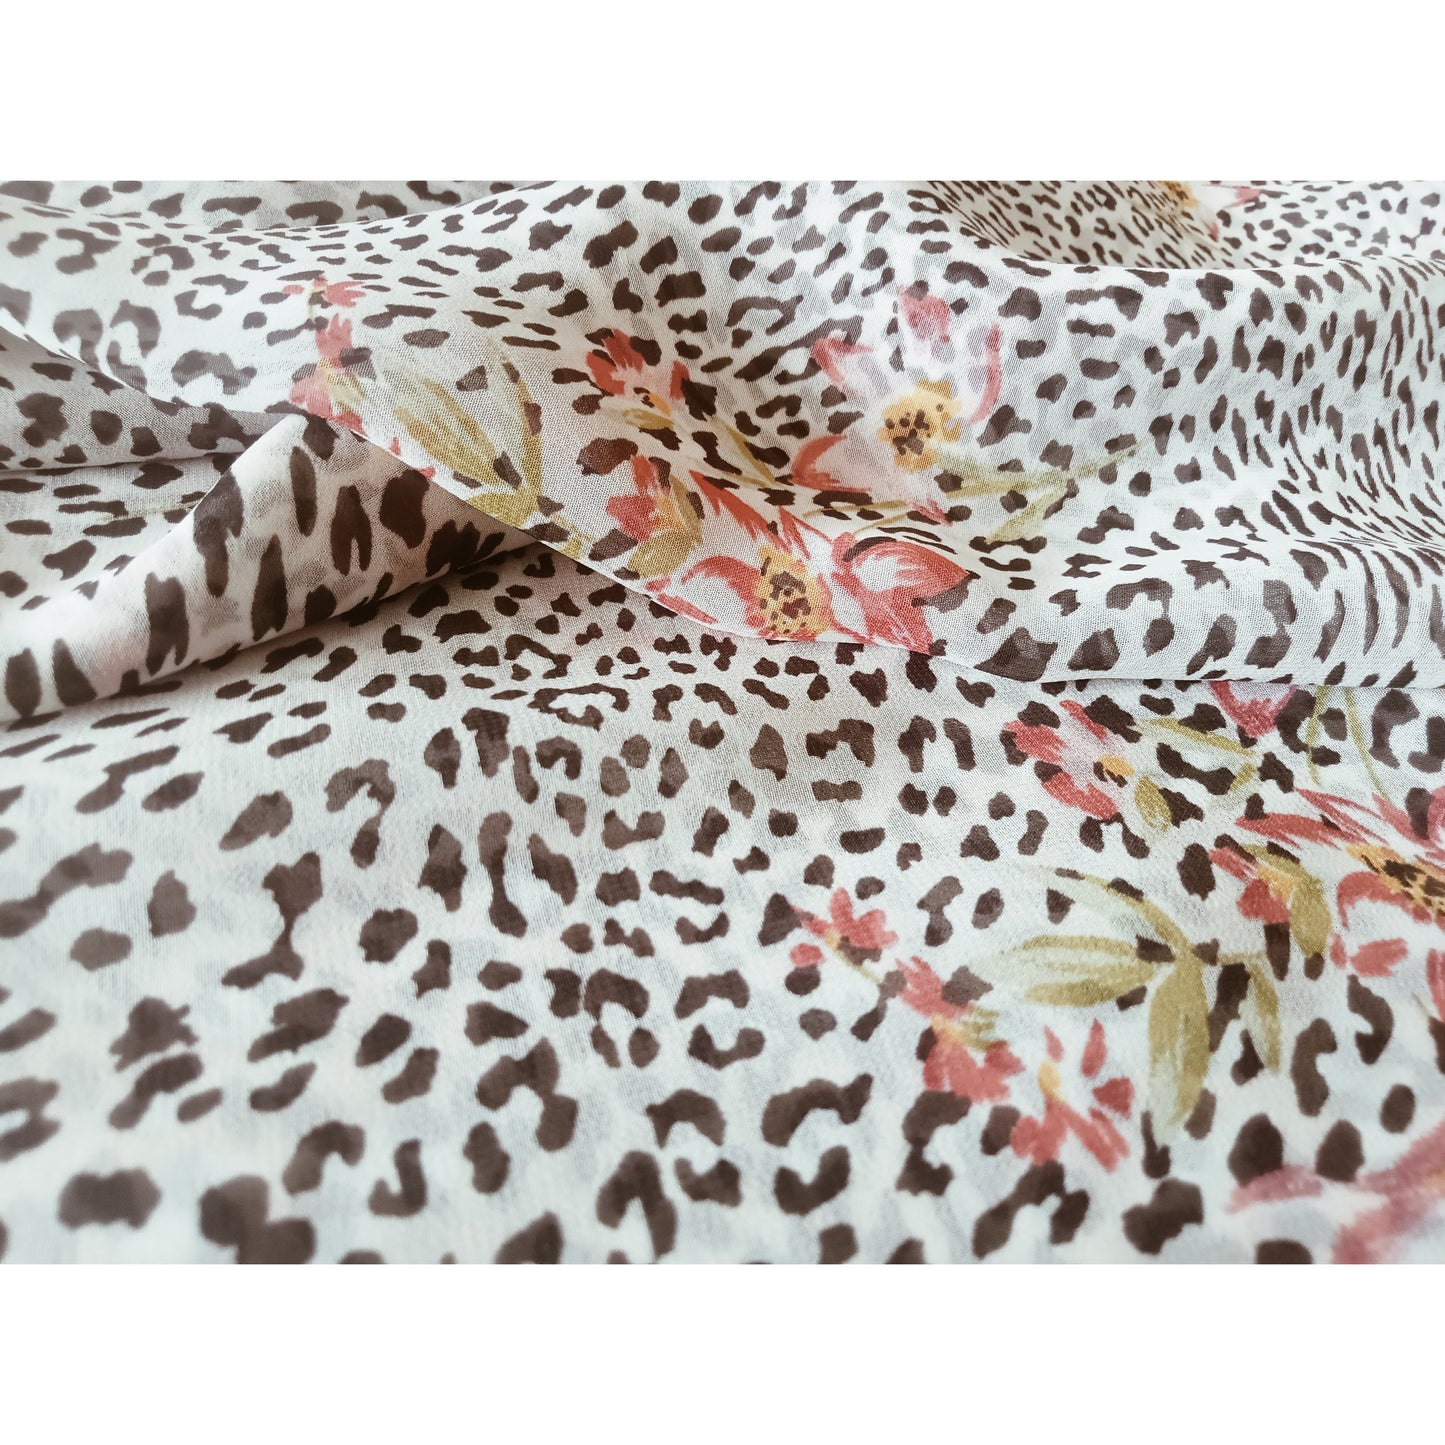 Bella - Leopard/floral printed chiffon- sold by 1/2mtr